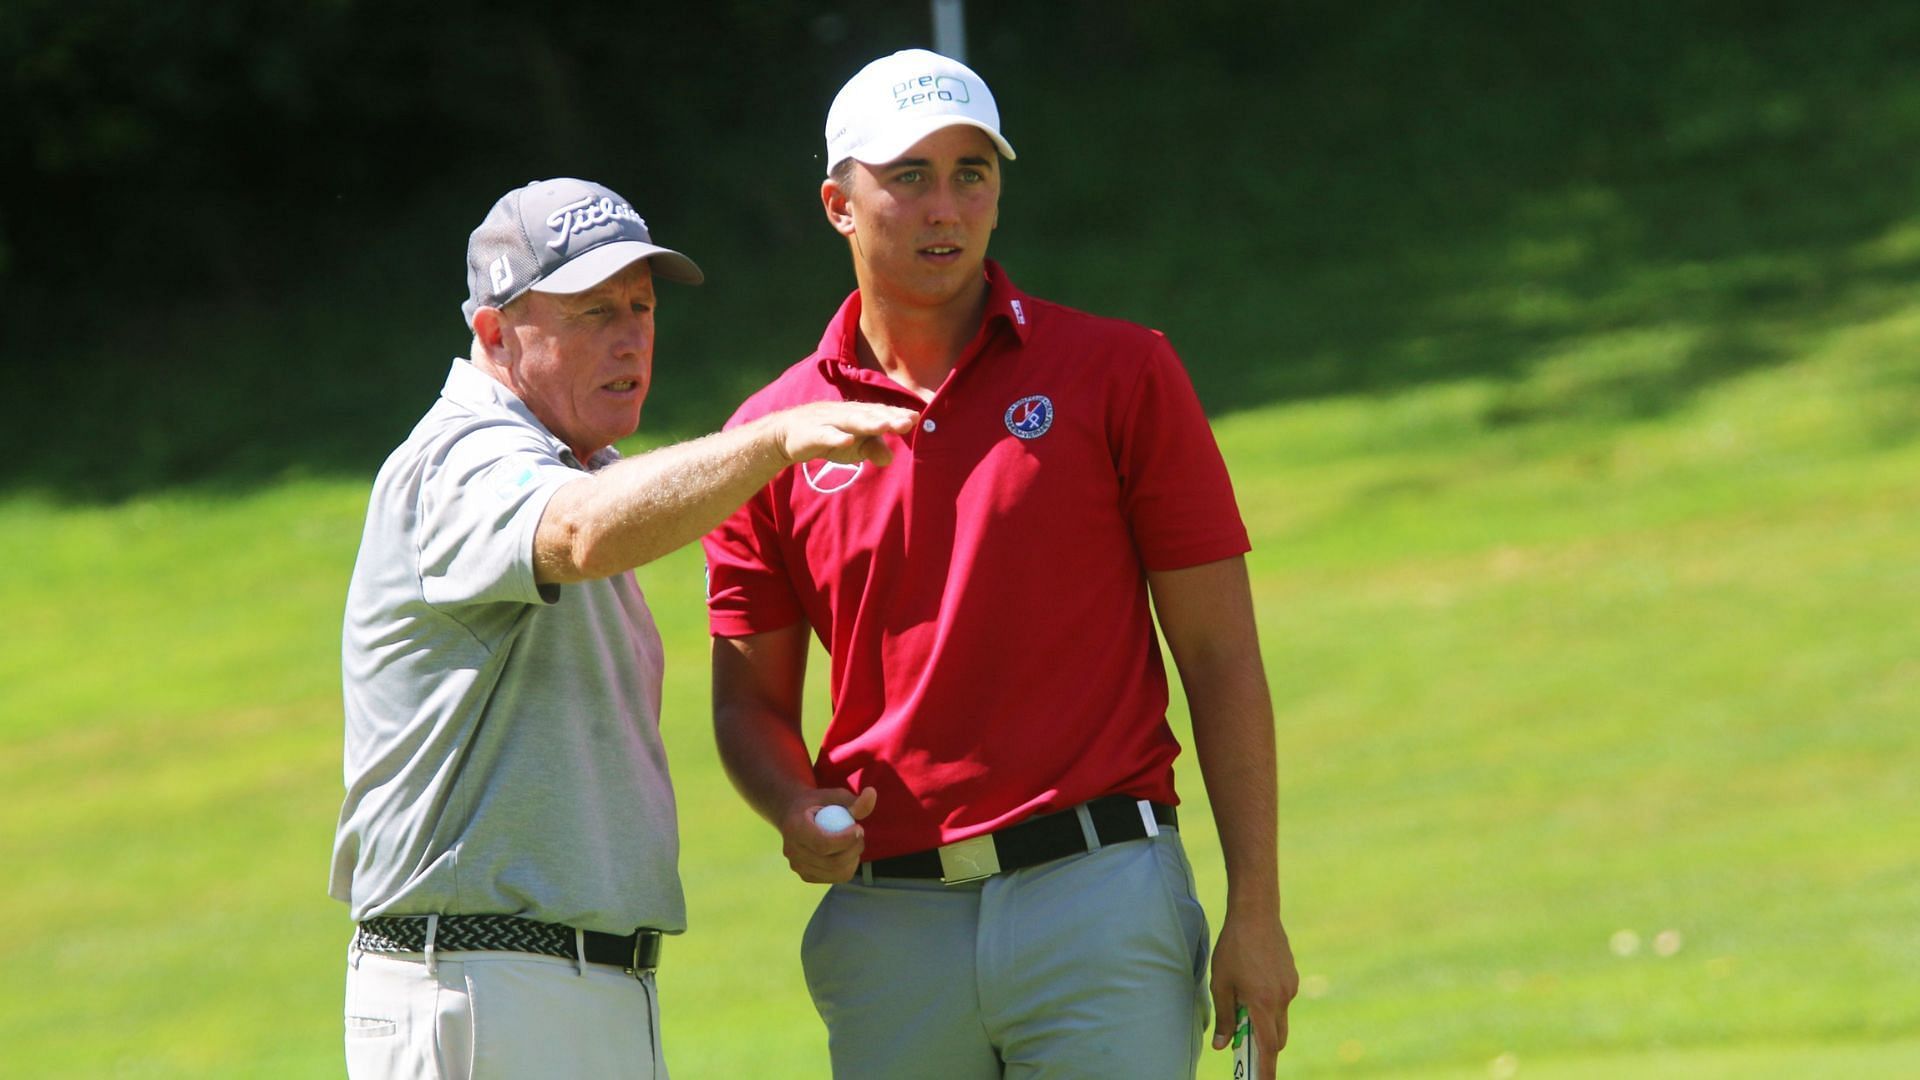 Ted Long with Marc Hammer at the STARNBERG OPEN 2020 (Image via ProGolfTour)